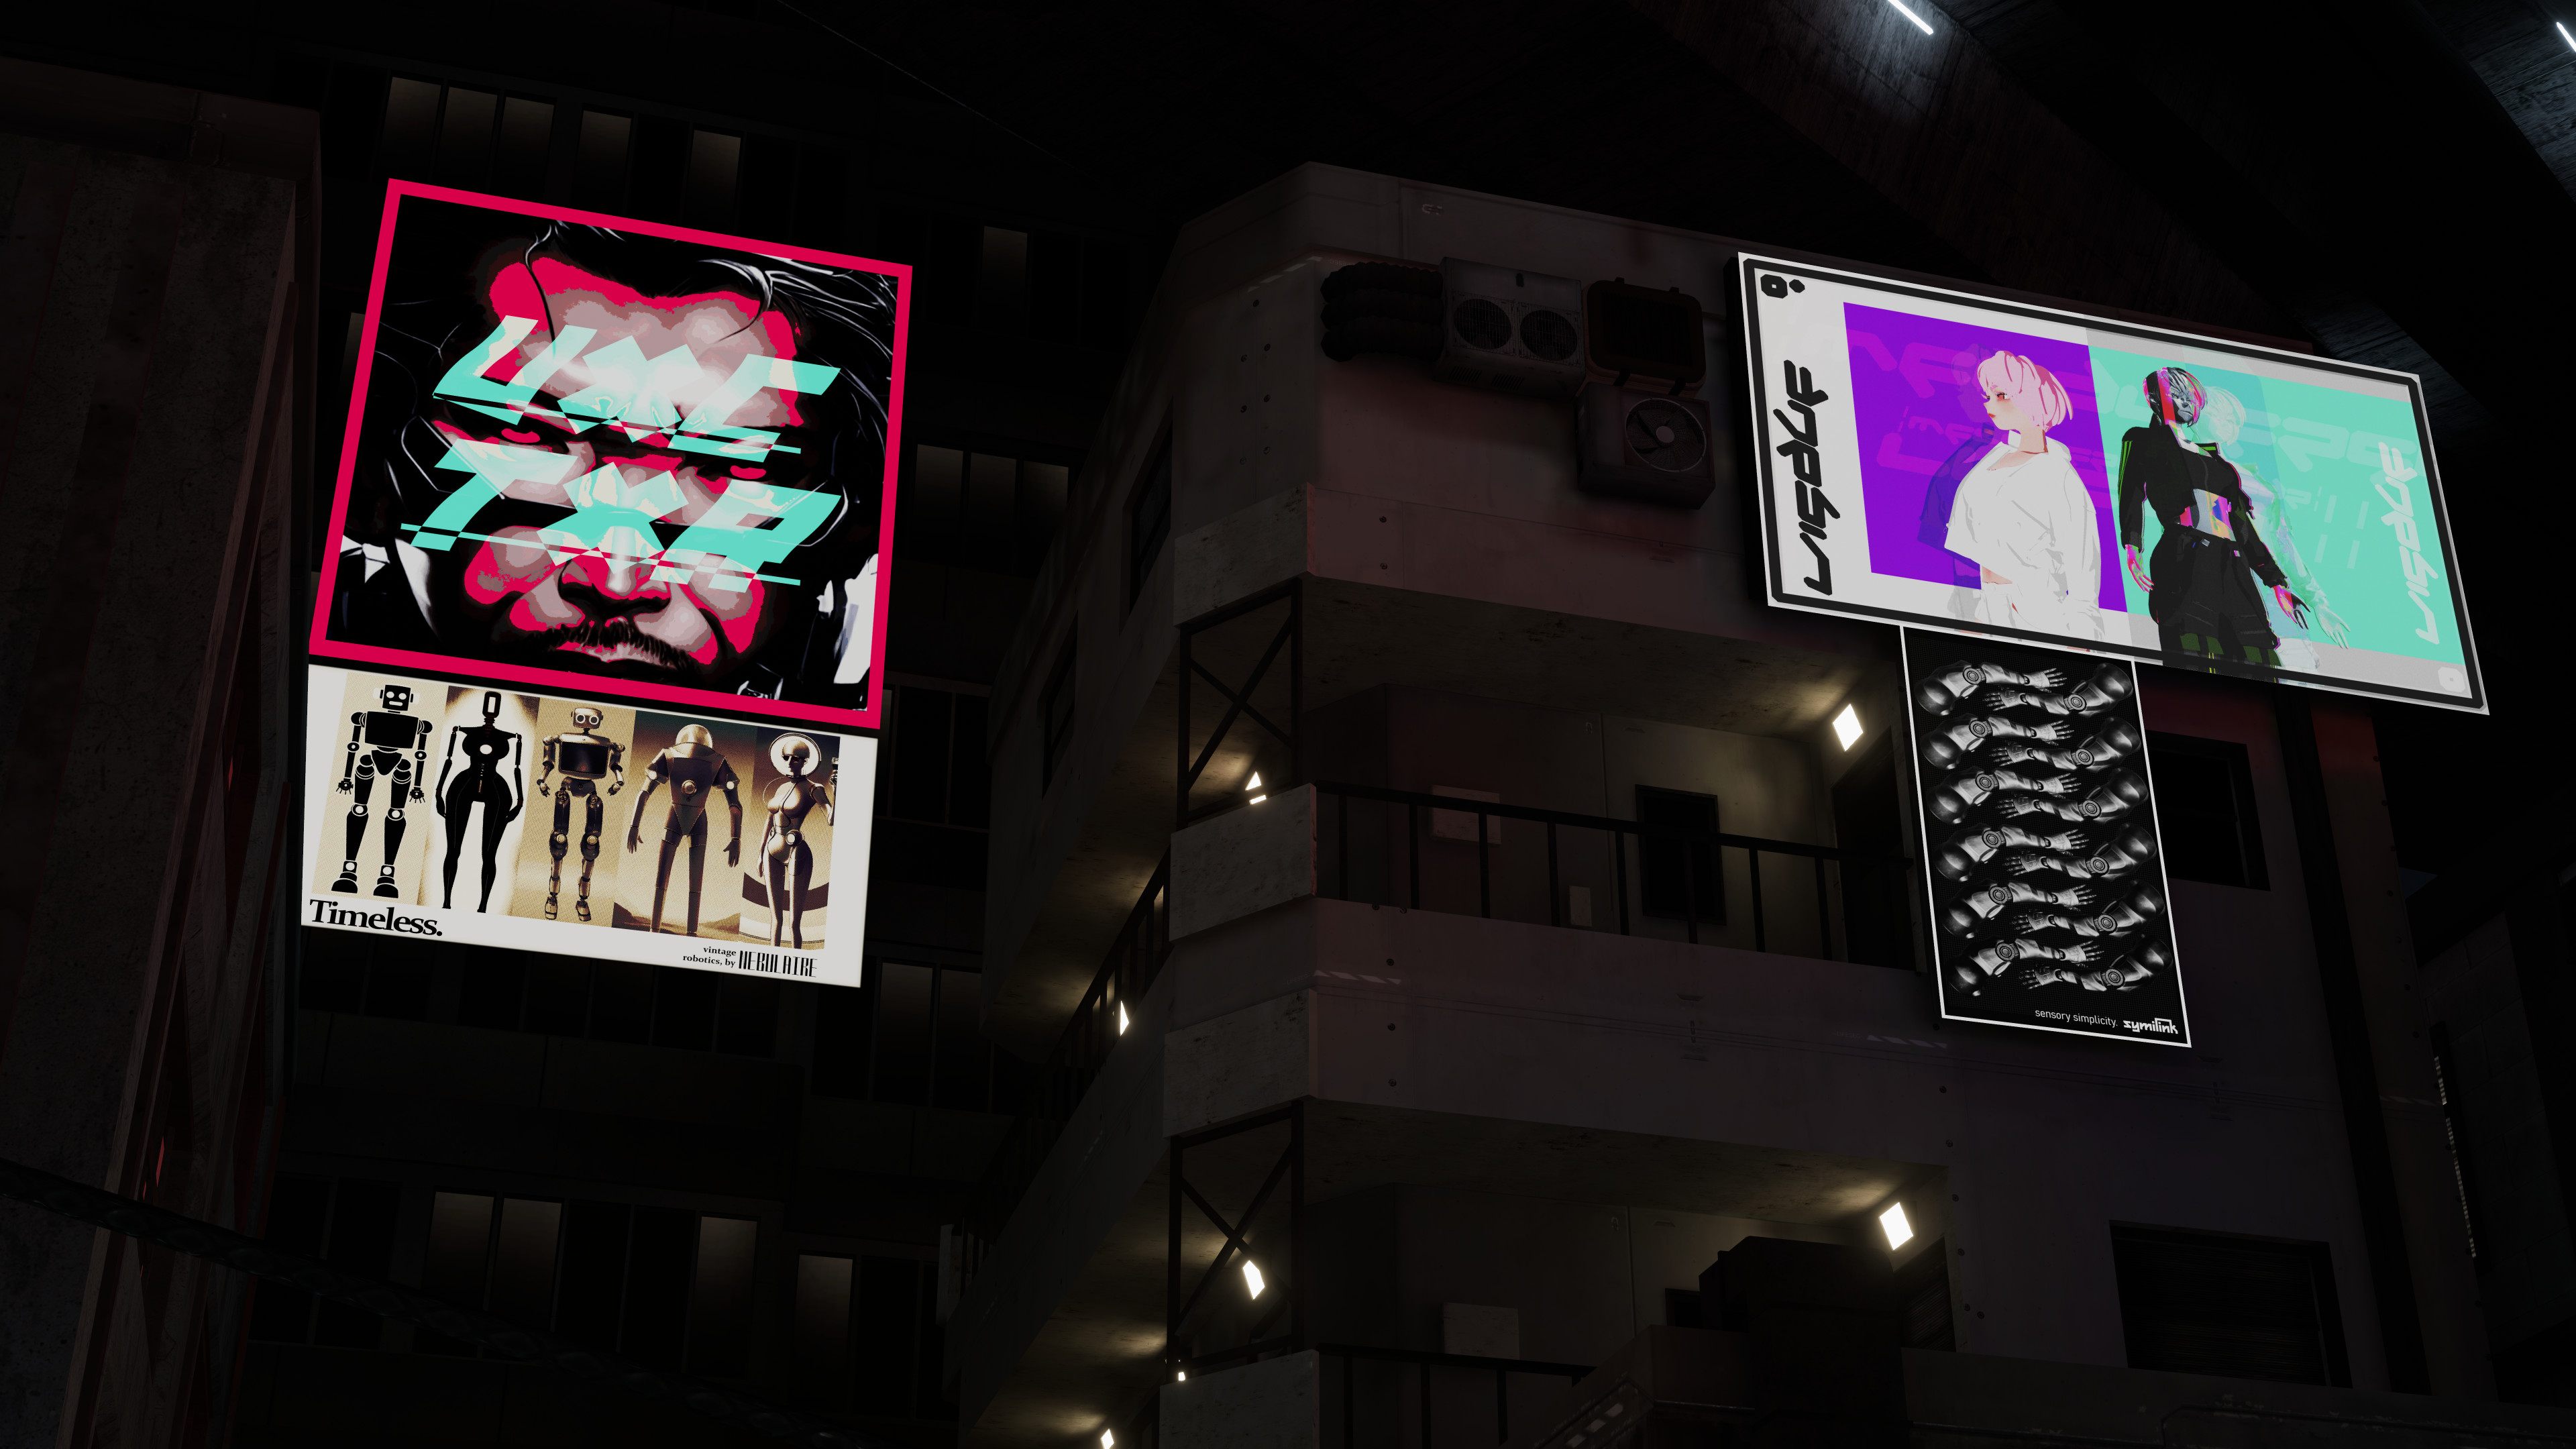 In-game billboards, Unity BIRP / VRchat